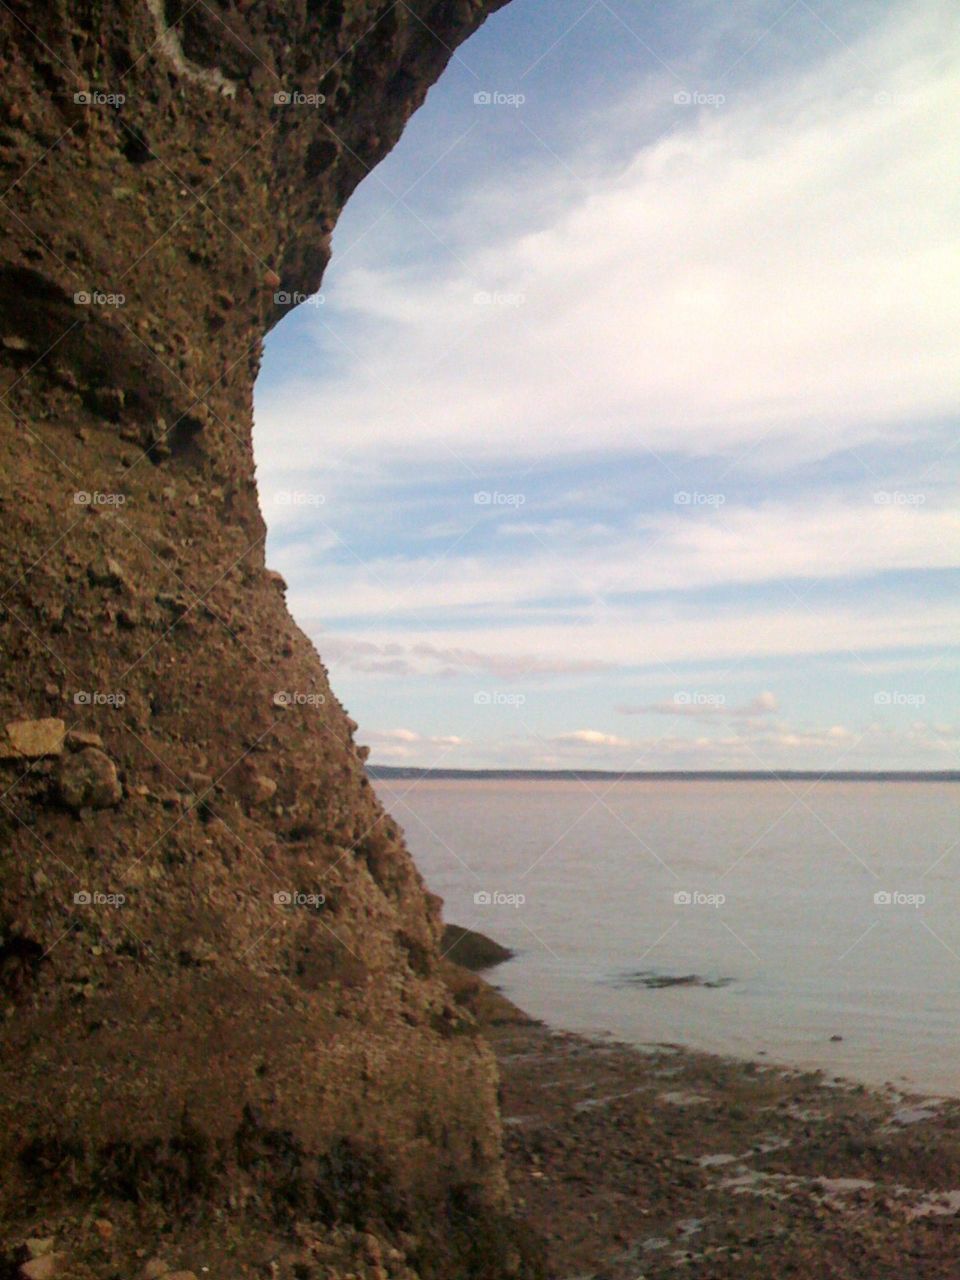 An image of the Atlantic Ocean from Prince Edward Island, Canada.